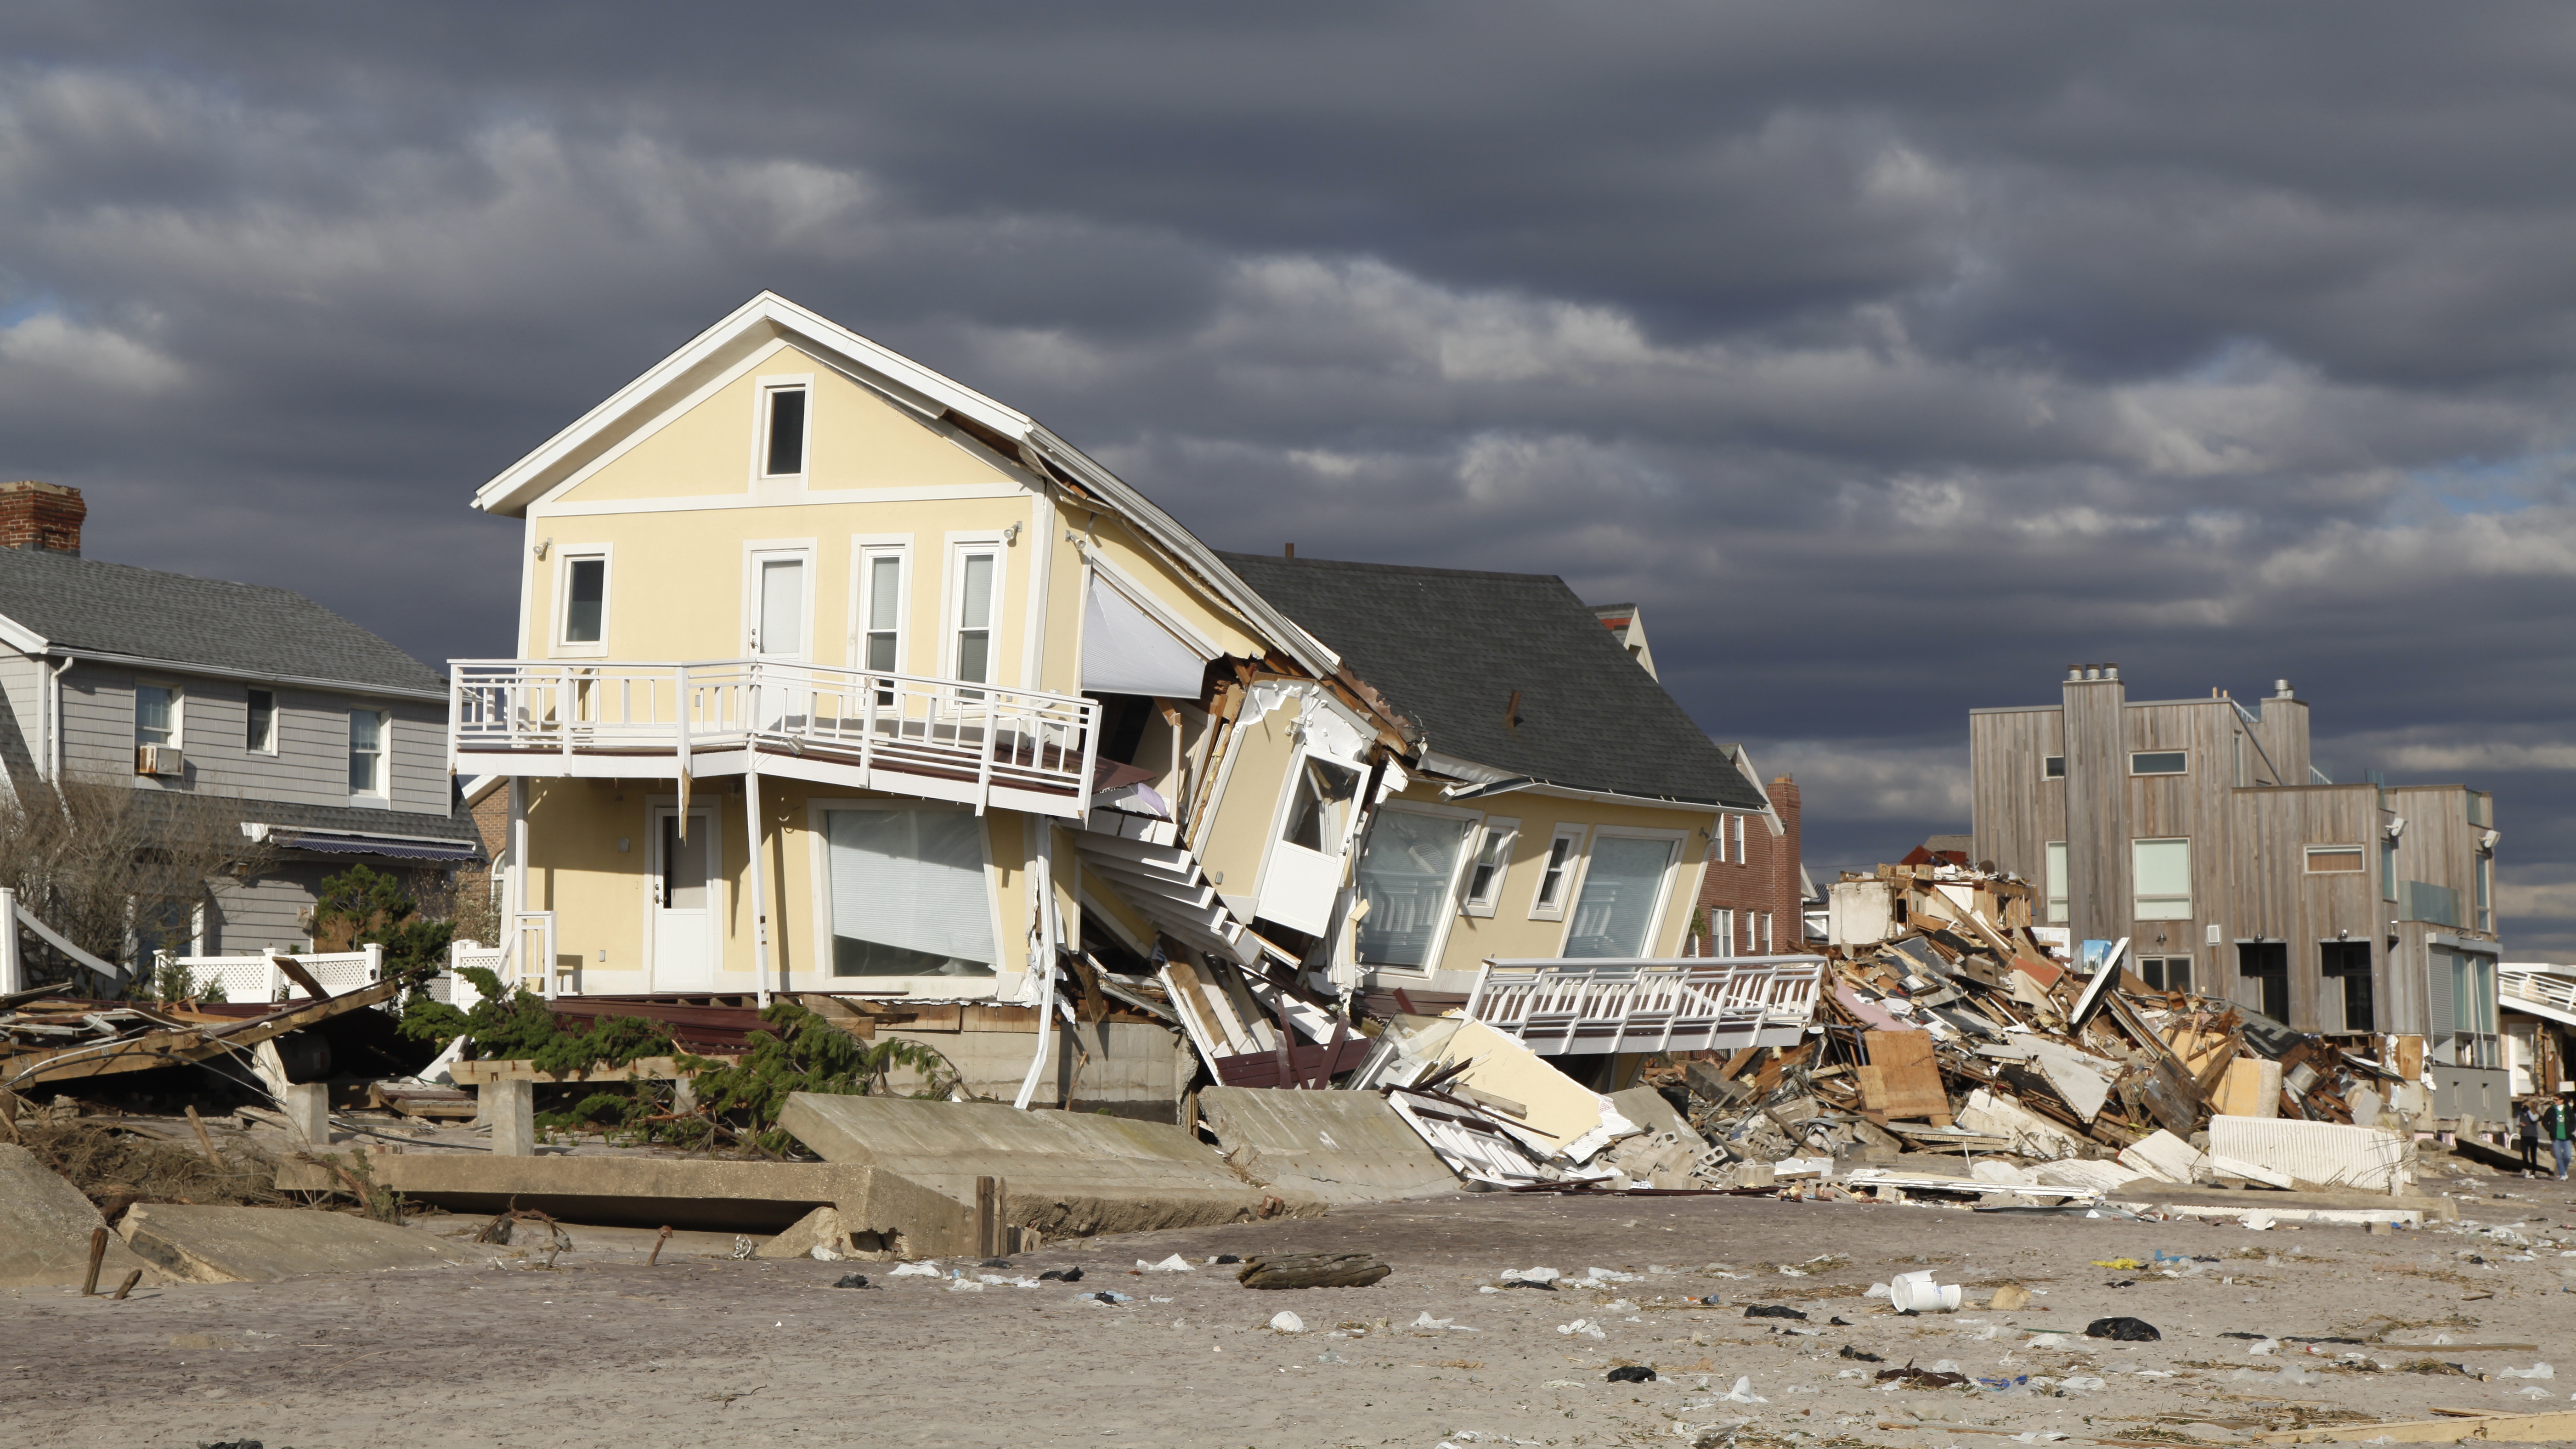 Risks posed by natural disasters  